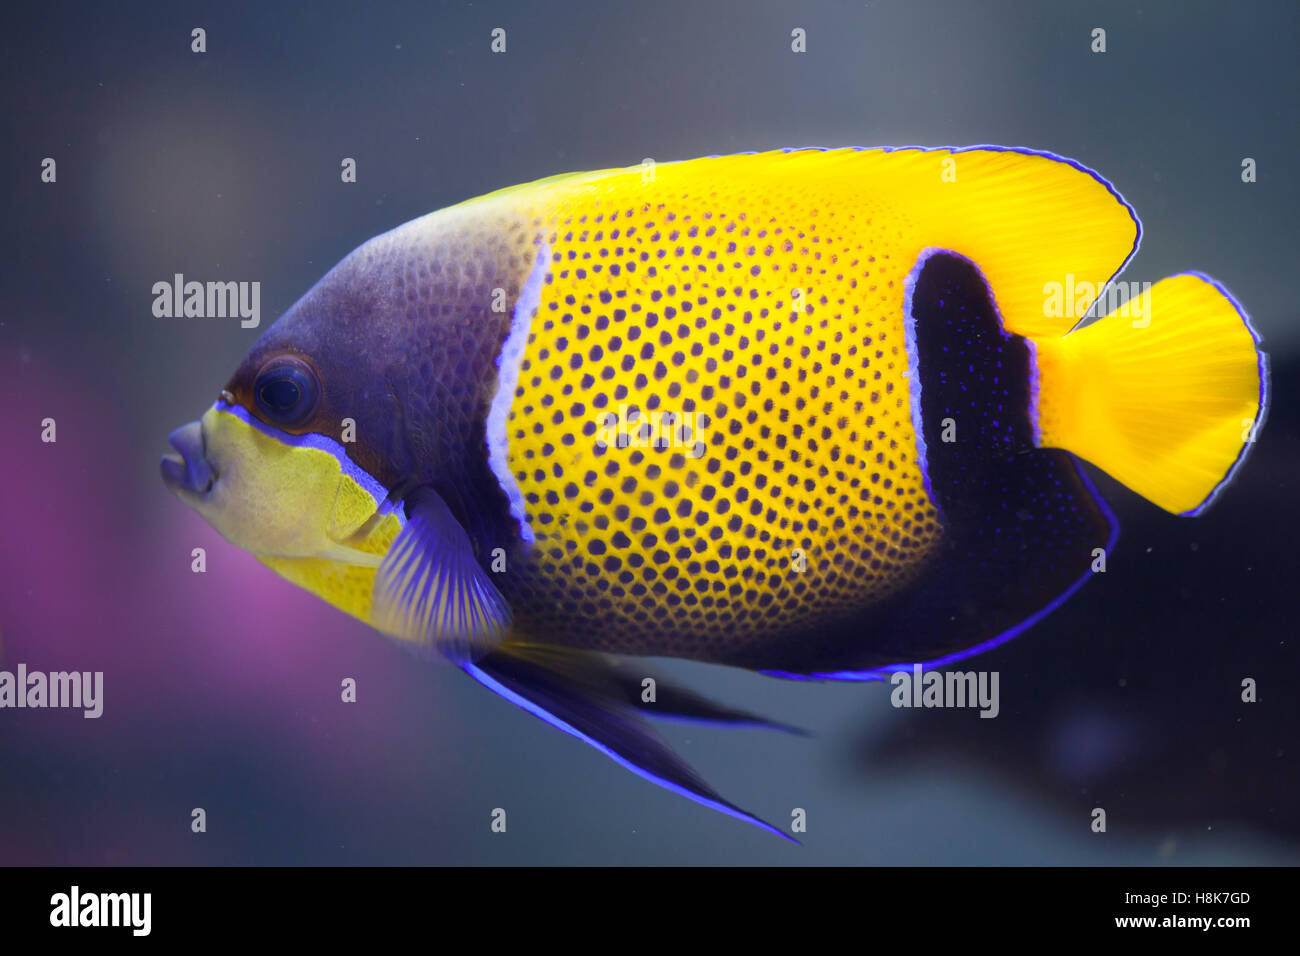 Blue-girdled angelfish (Pomacanthus navarchus), also known as the majestic angelfish. Stock Photo